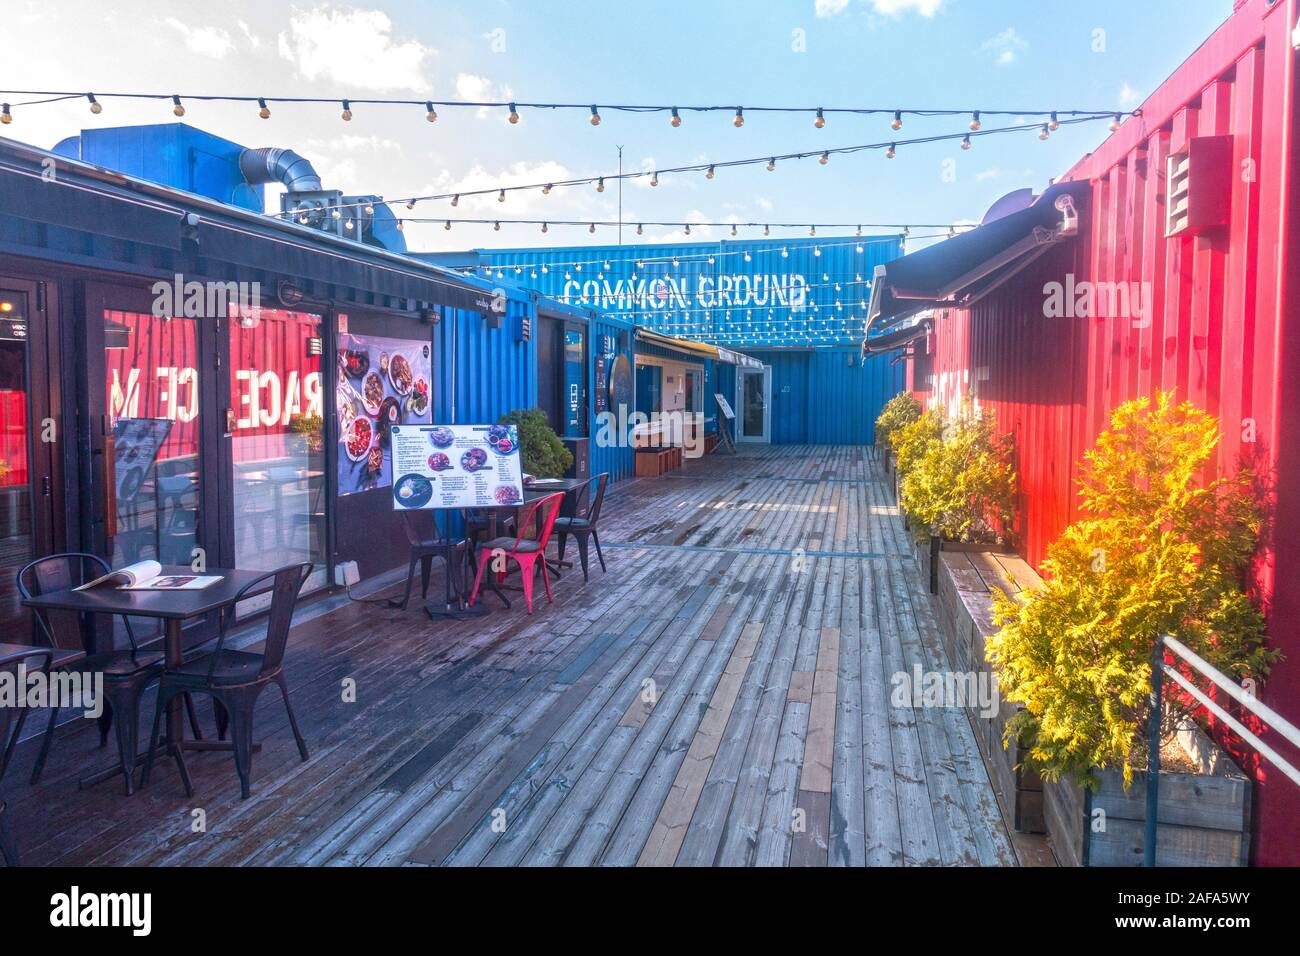 Seoul, December 2nd, 2019: Common Ground is Korea's first cultural space to be made out of shipping containers Stock Photo